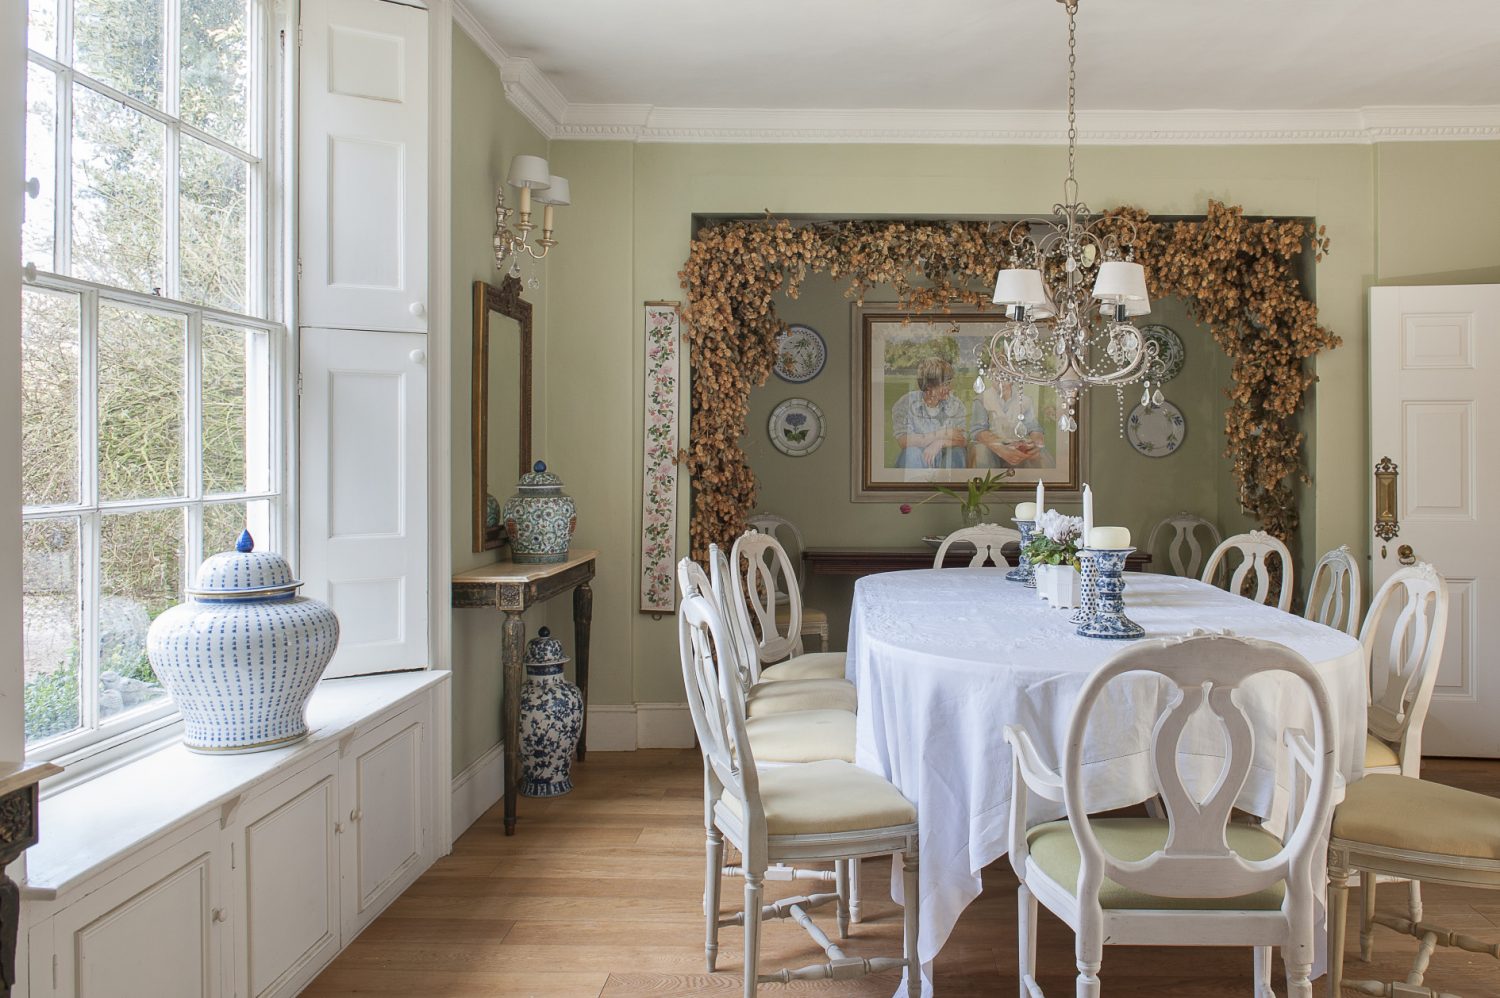 With a view through large sash windows, out over the sweeping gravel drive and front lawns, the dining room seems the perfect room for entertaining